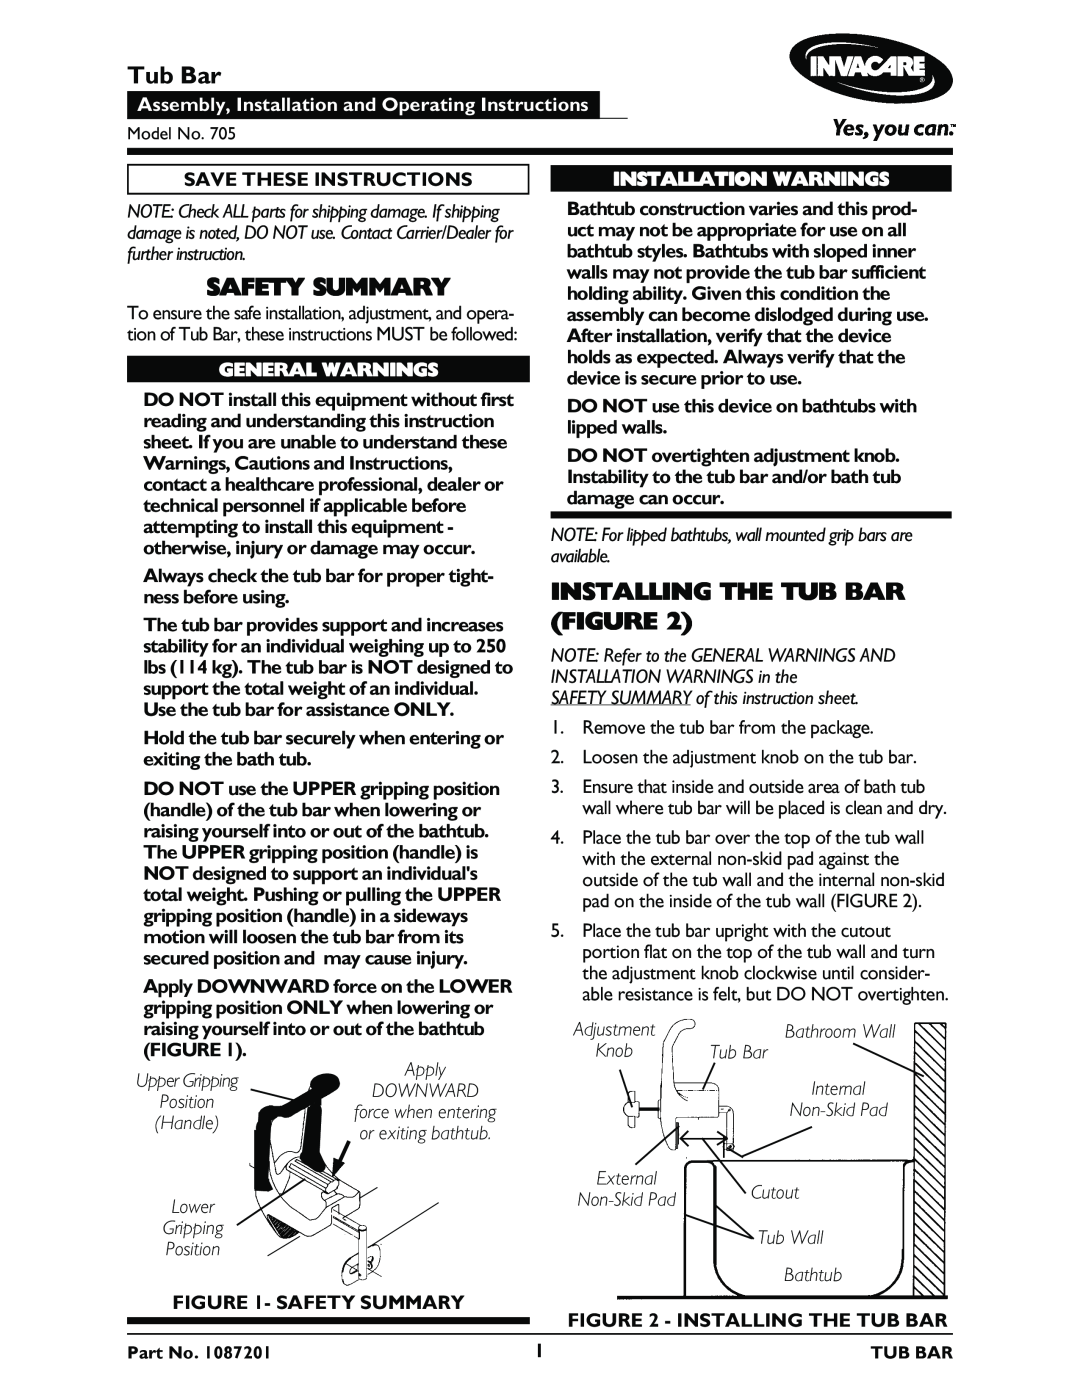 Invacare 705 instruction sheet Safety Summary, Installing The Tub Bar Figure, Save These Instructions, Apply DOWNWARD 